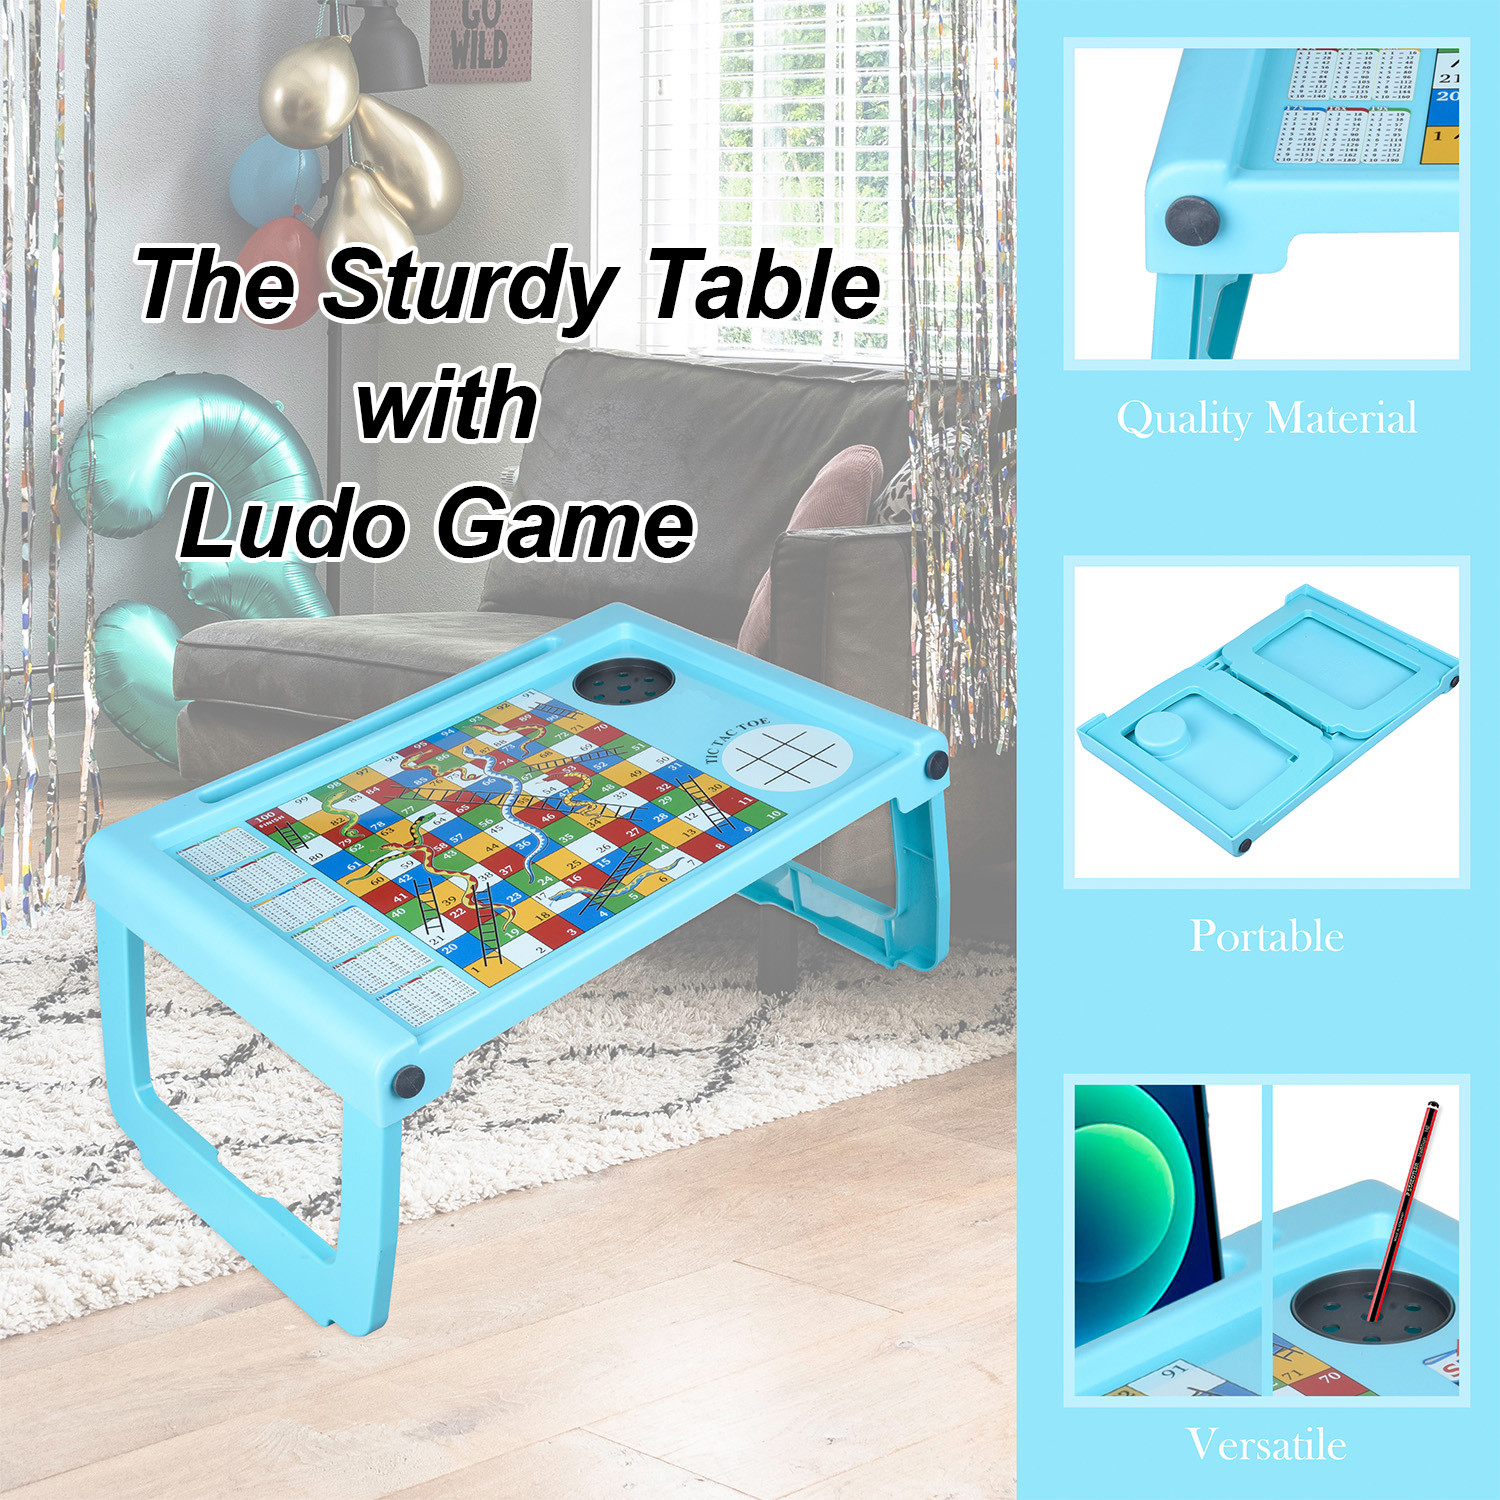 Kuber Industries Study Table | Study Bed Table for Kids | Foldable Study Table | Ludo Game Table for Kids | Laptop Support Table | Kids Gaming Study Ludo Table with Bottle Holder | Green